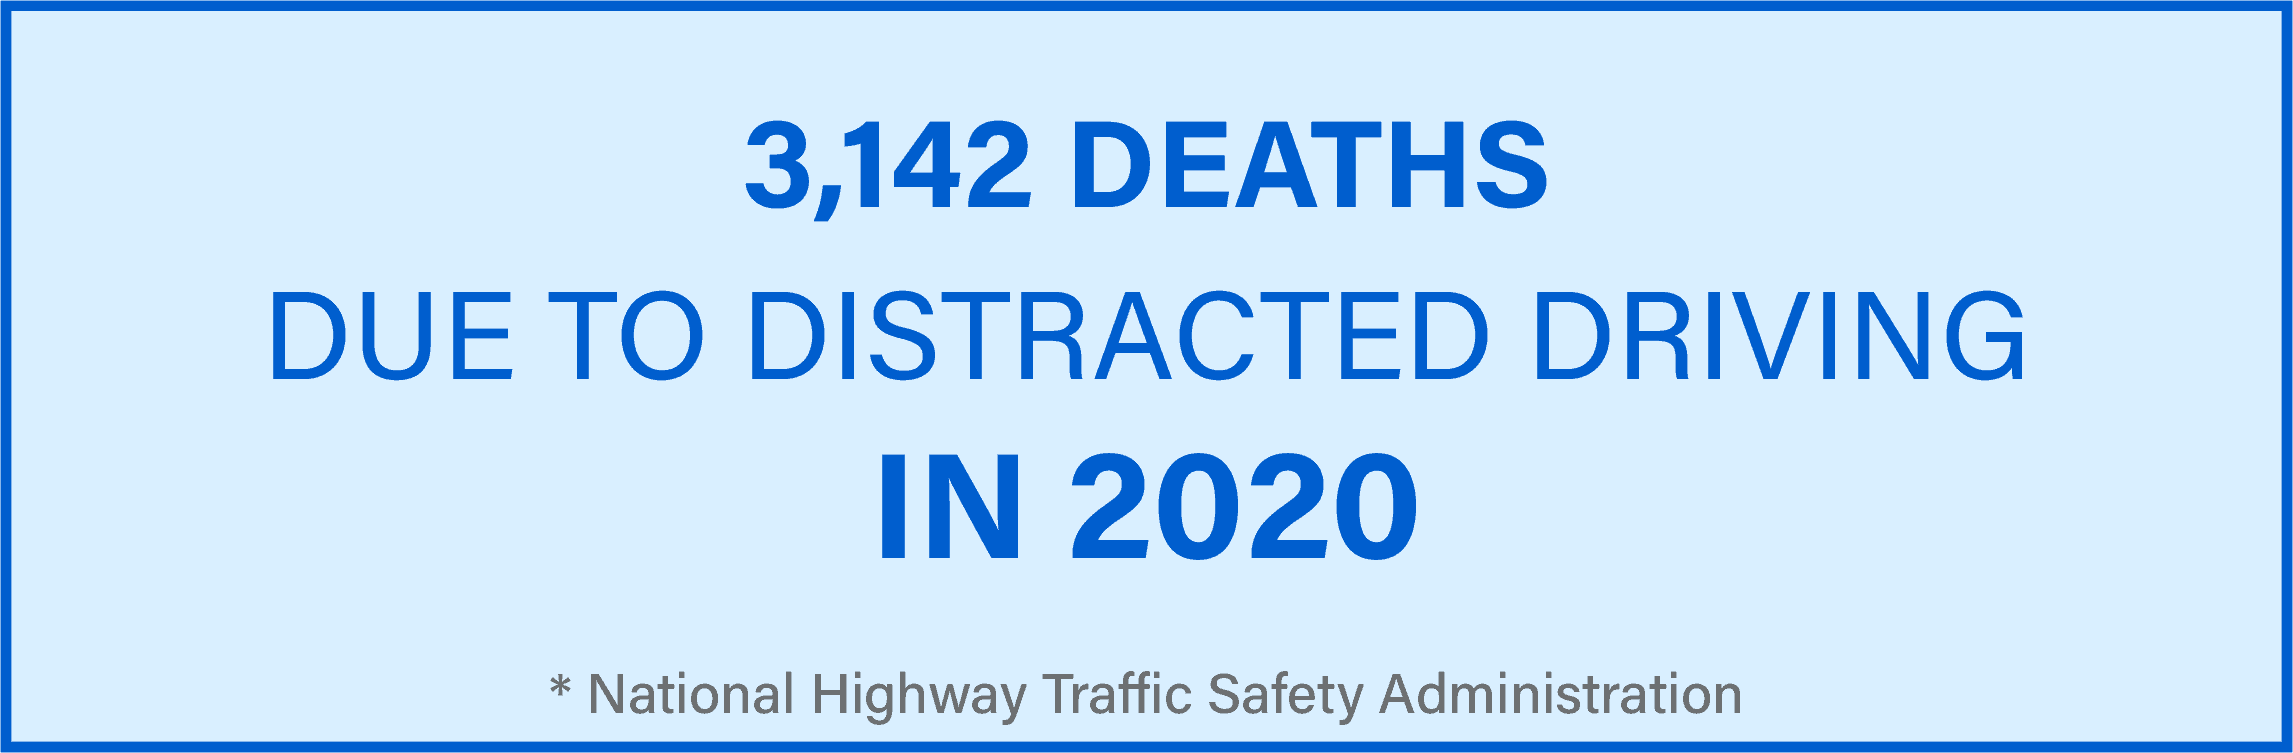 Distracted driving claimed 3,142 lives in 2020